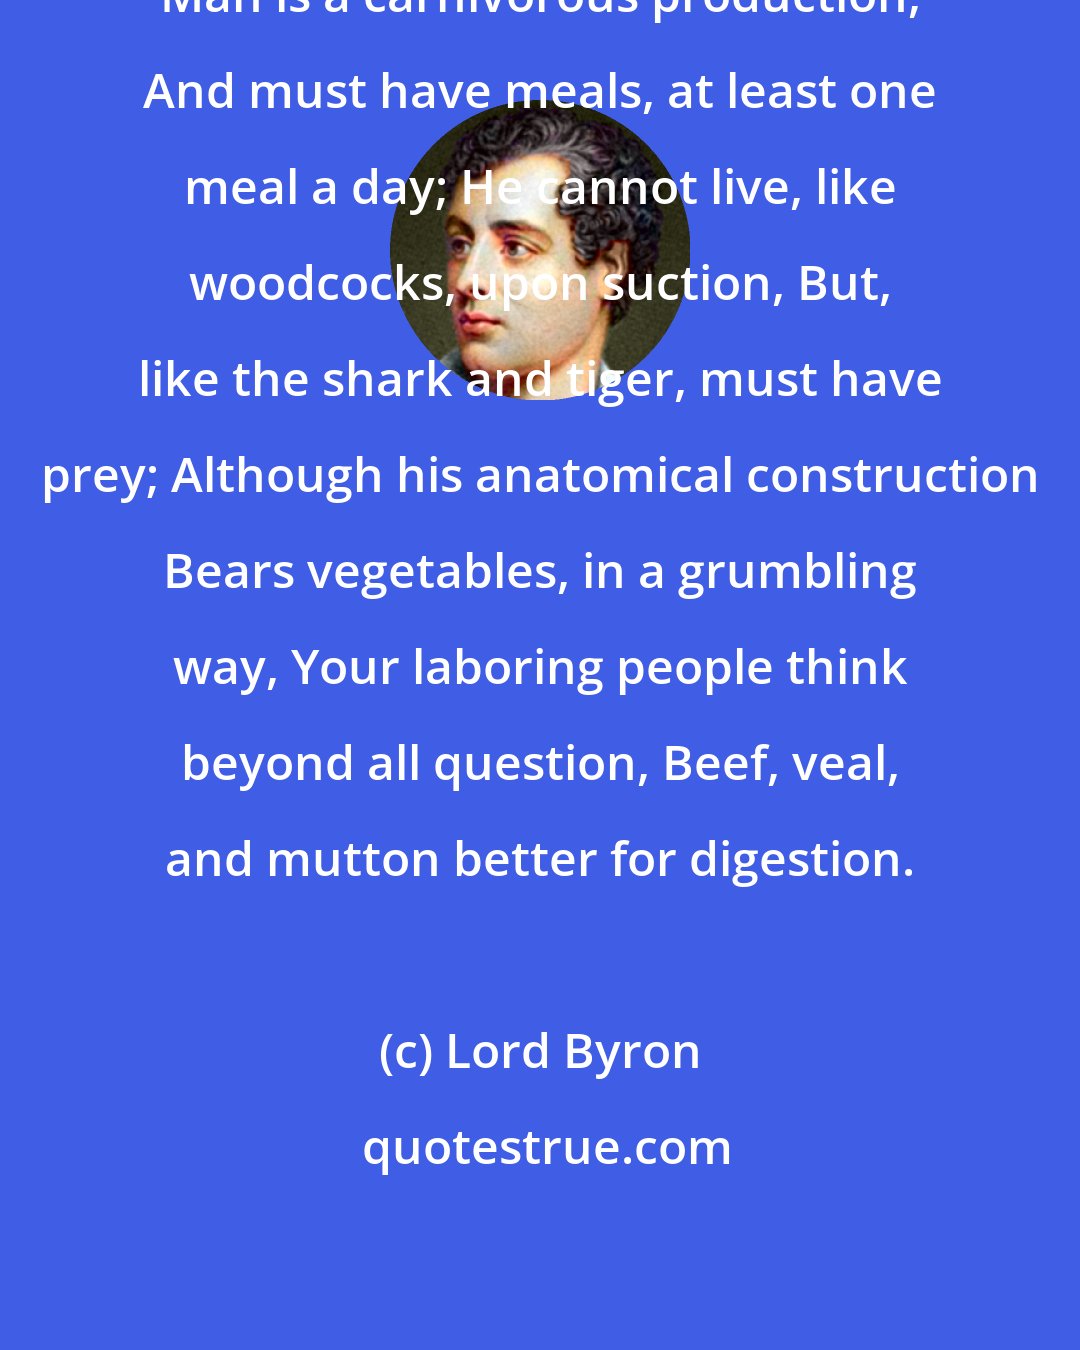 Lord Byron: Man is a carnivorous production, And must have meals, at least one meal a day; He cannot live, like woodcocks, upon suction, But, like the shark and tiger, must have prey; Although his anatomical construction Bears vegetables, in a grumbling way, Your laboring people think beyond all question, Beef, veal, and mutton better for digestion.